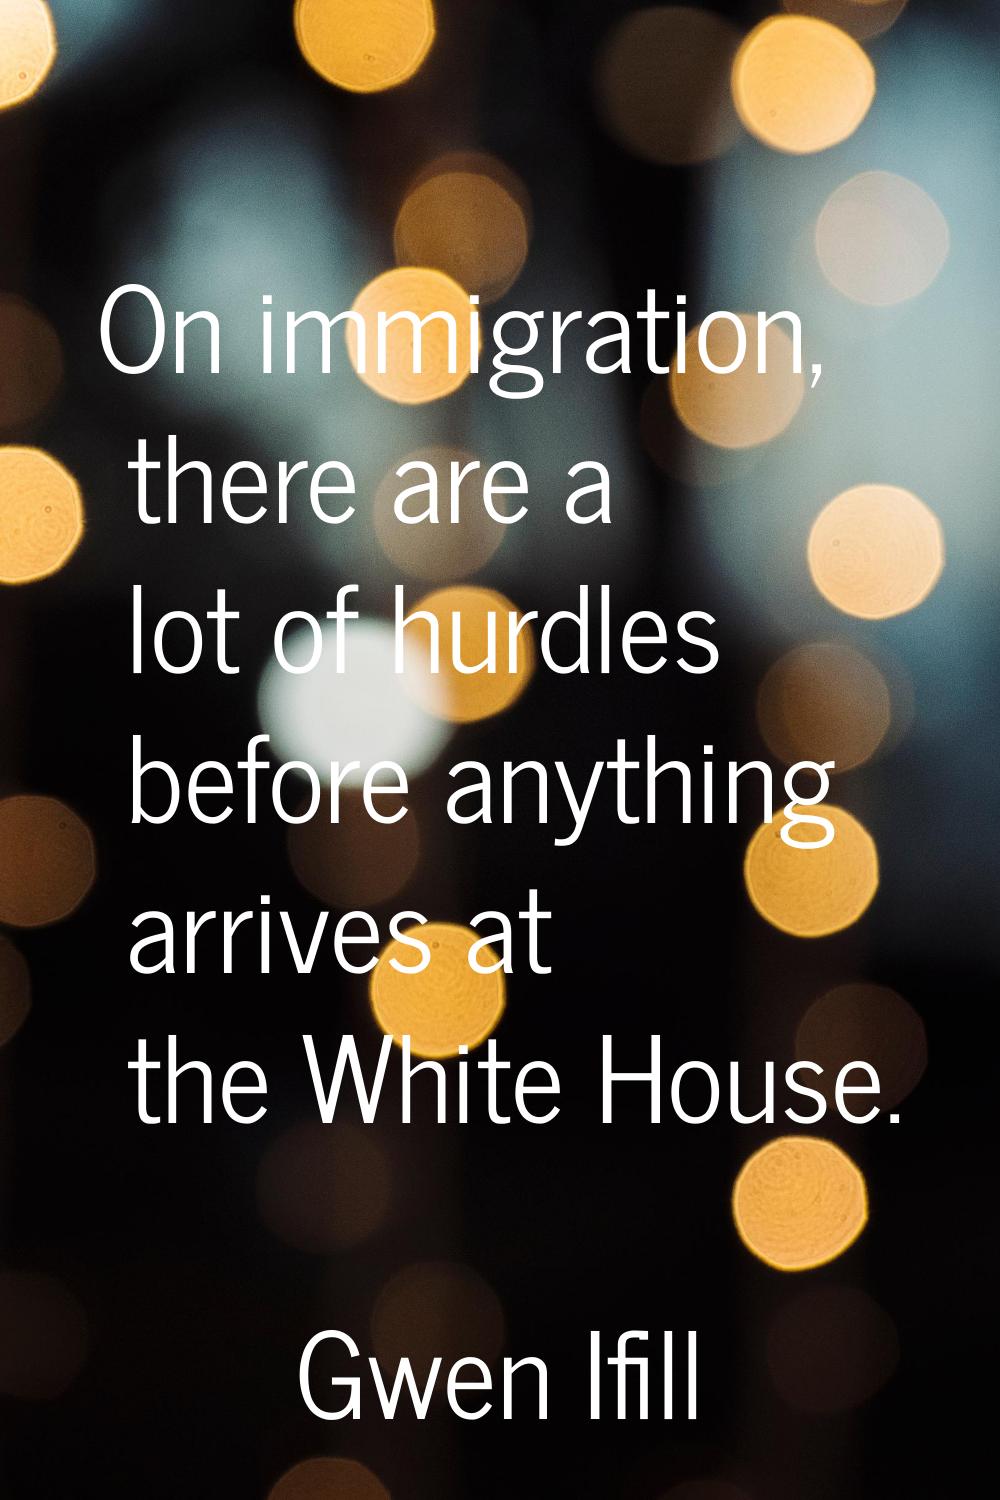 On immigration, there are a lot of hurdles before anything arrives at the White House.